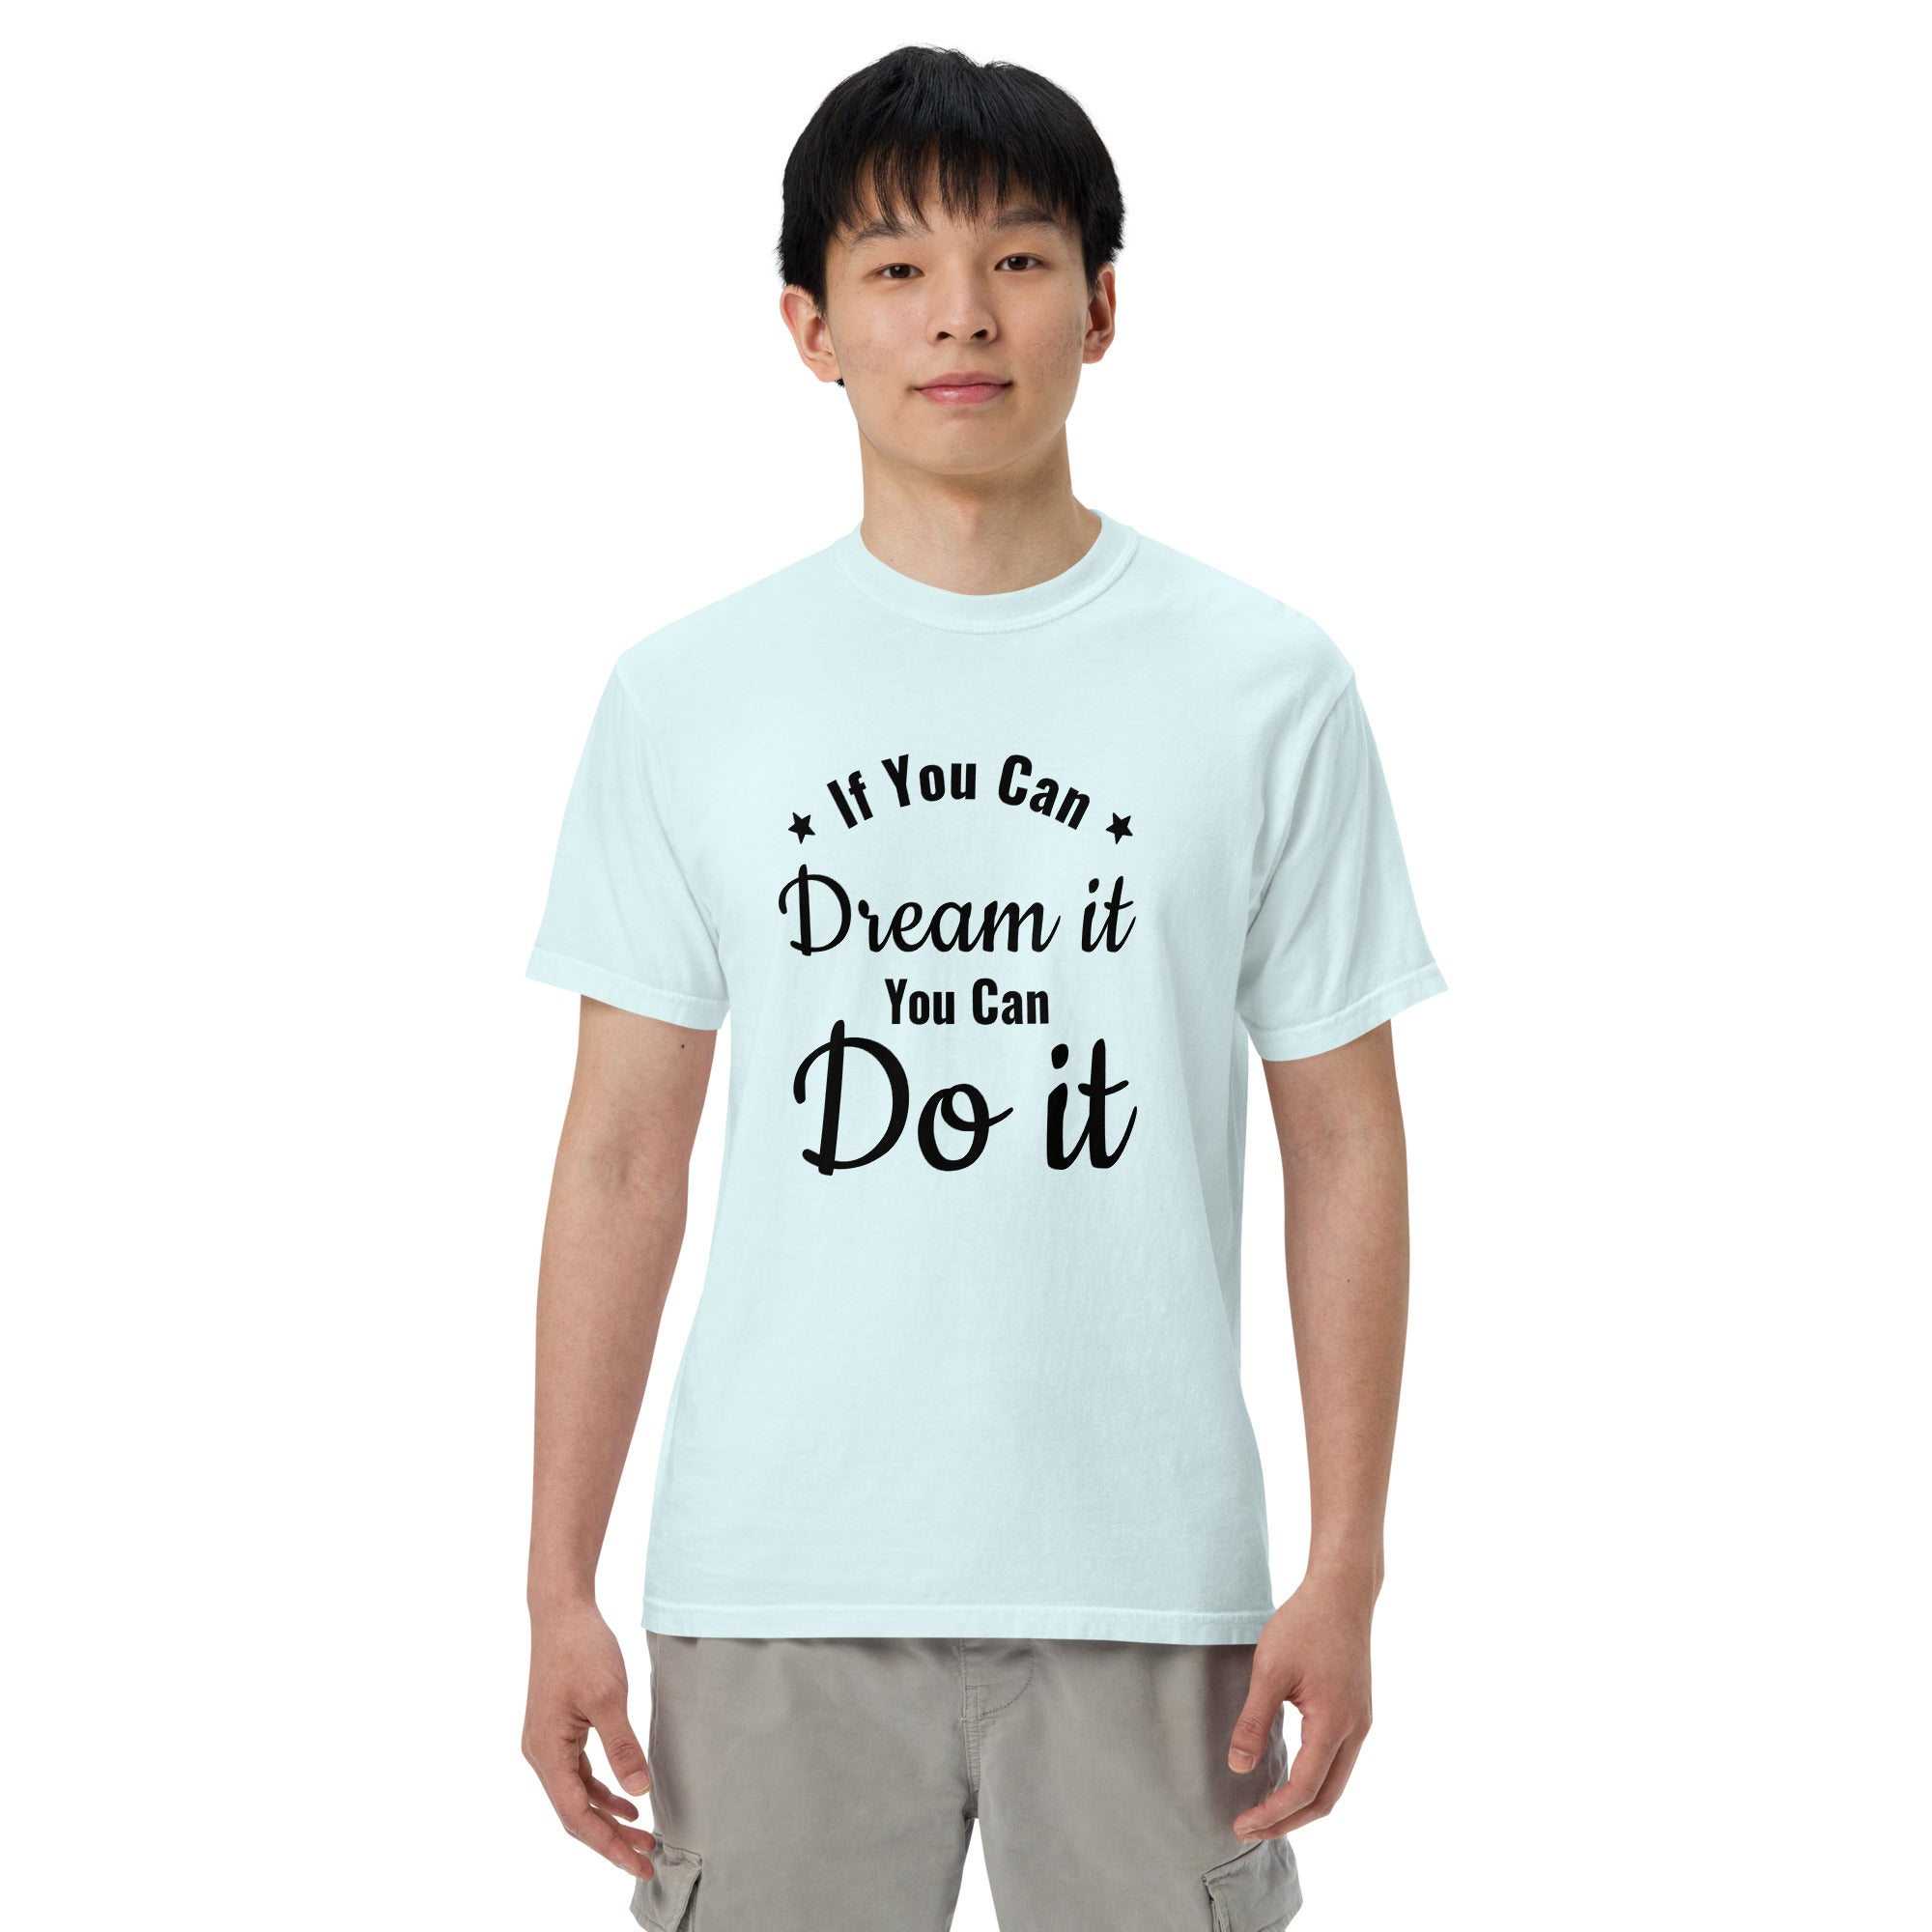 If You Can Dream it, You Can Do it t-shirt